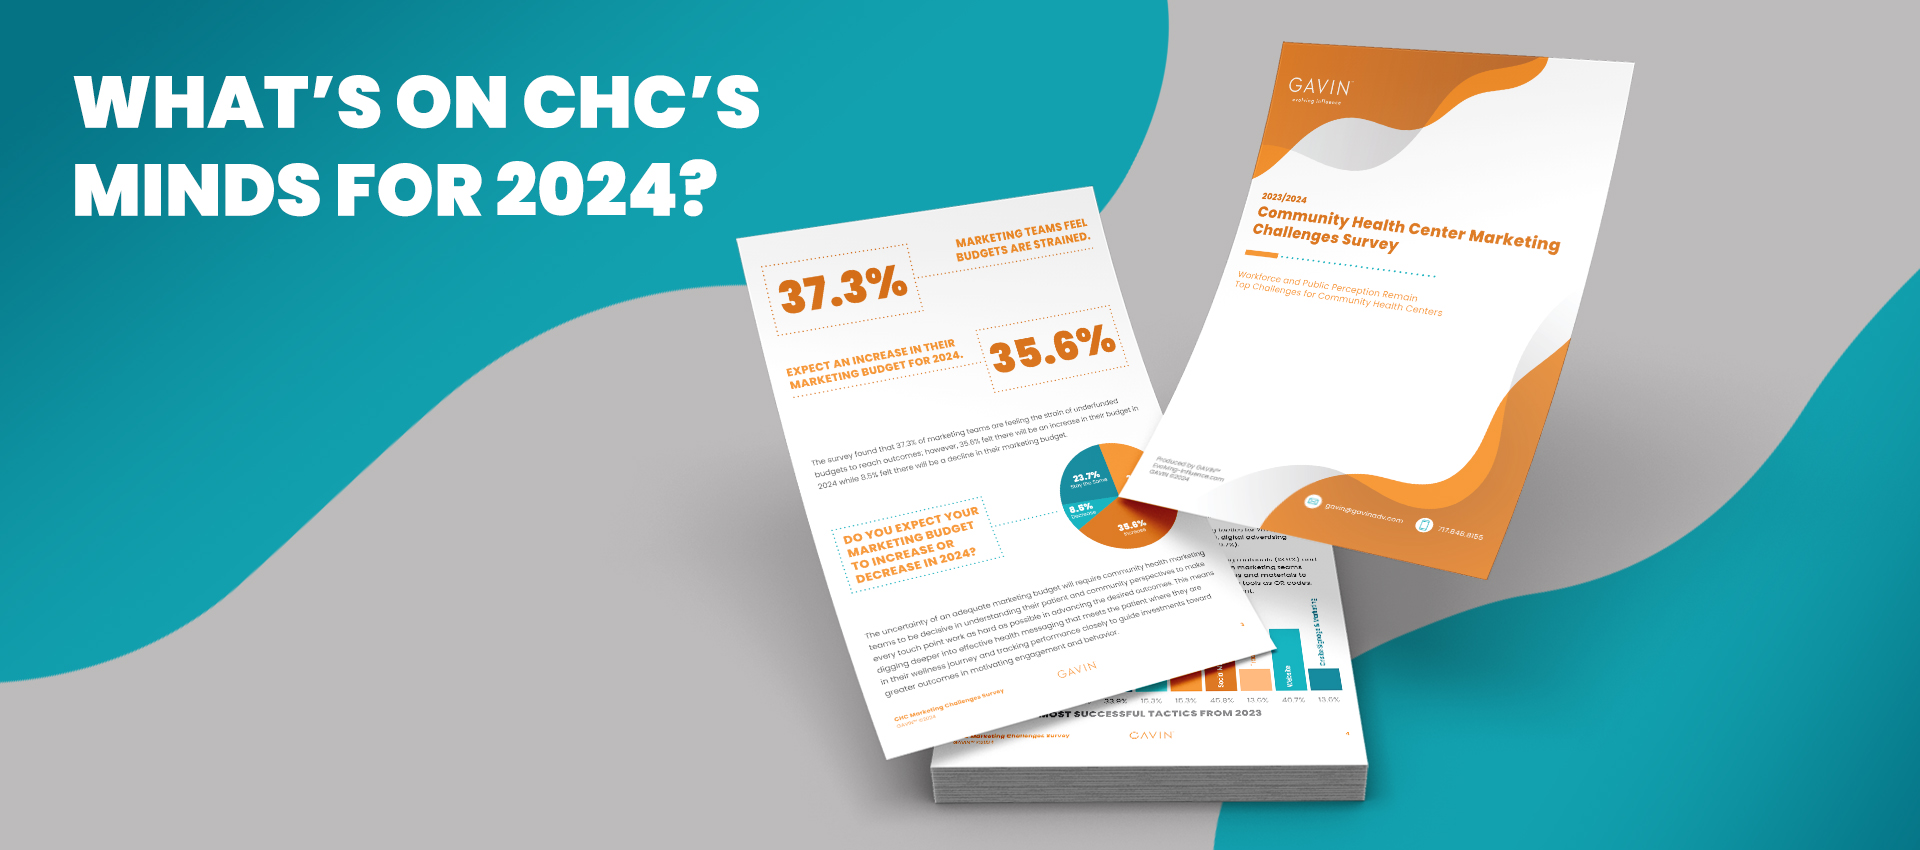 What's on CHC's minds for 2024?